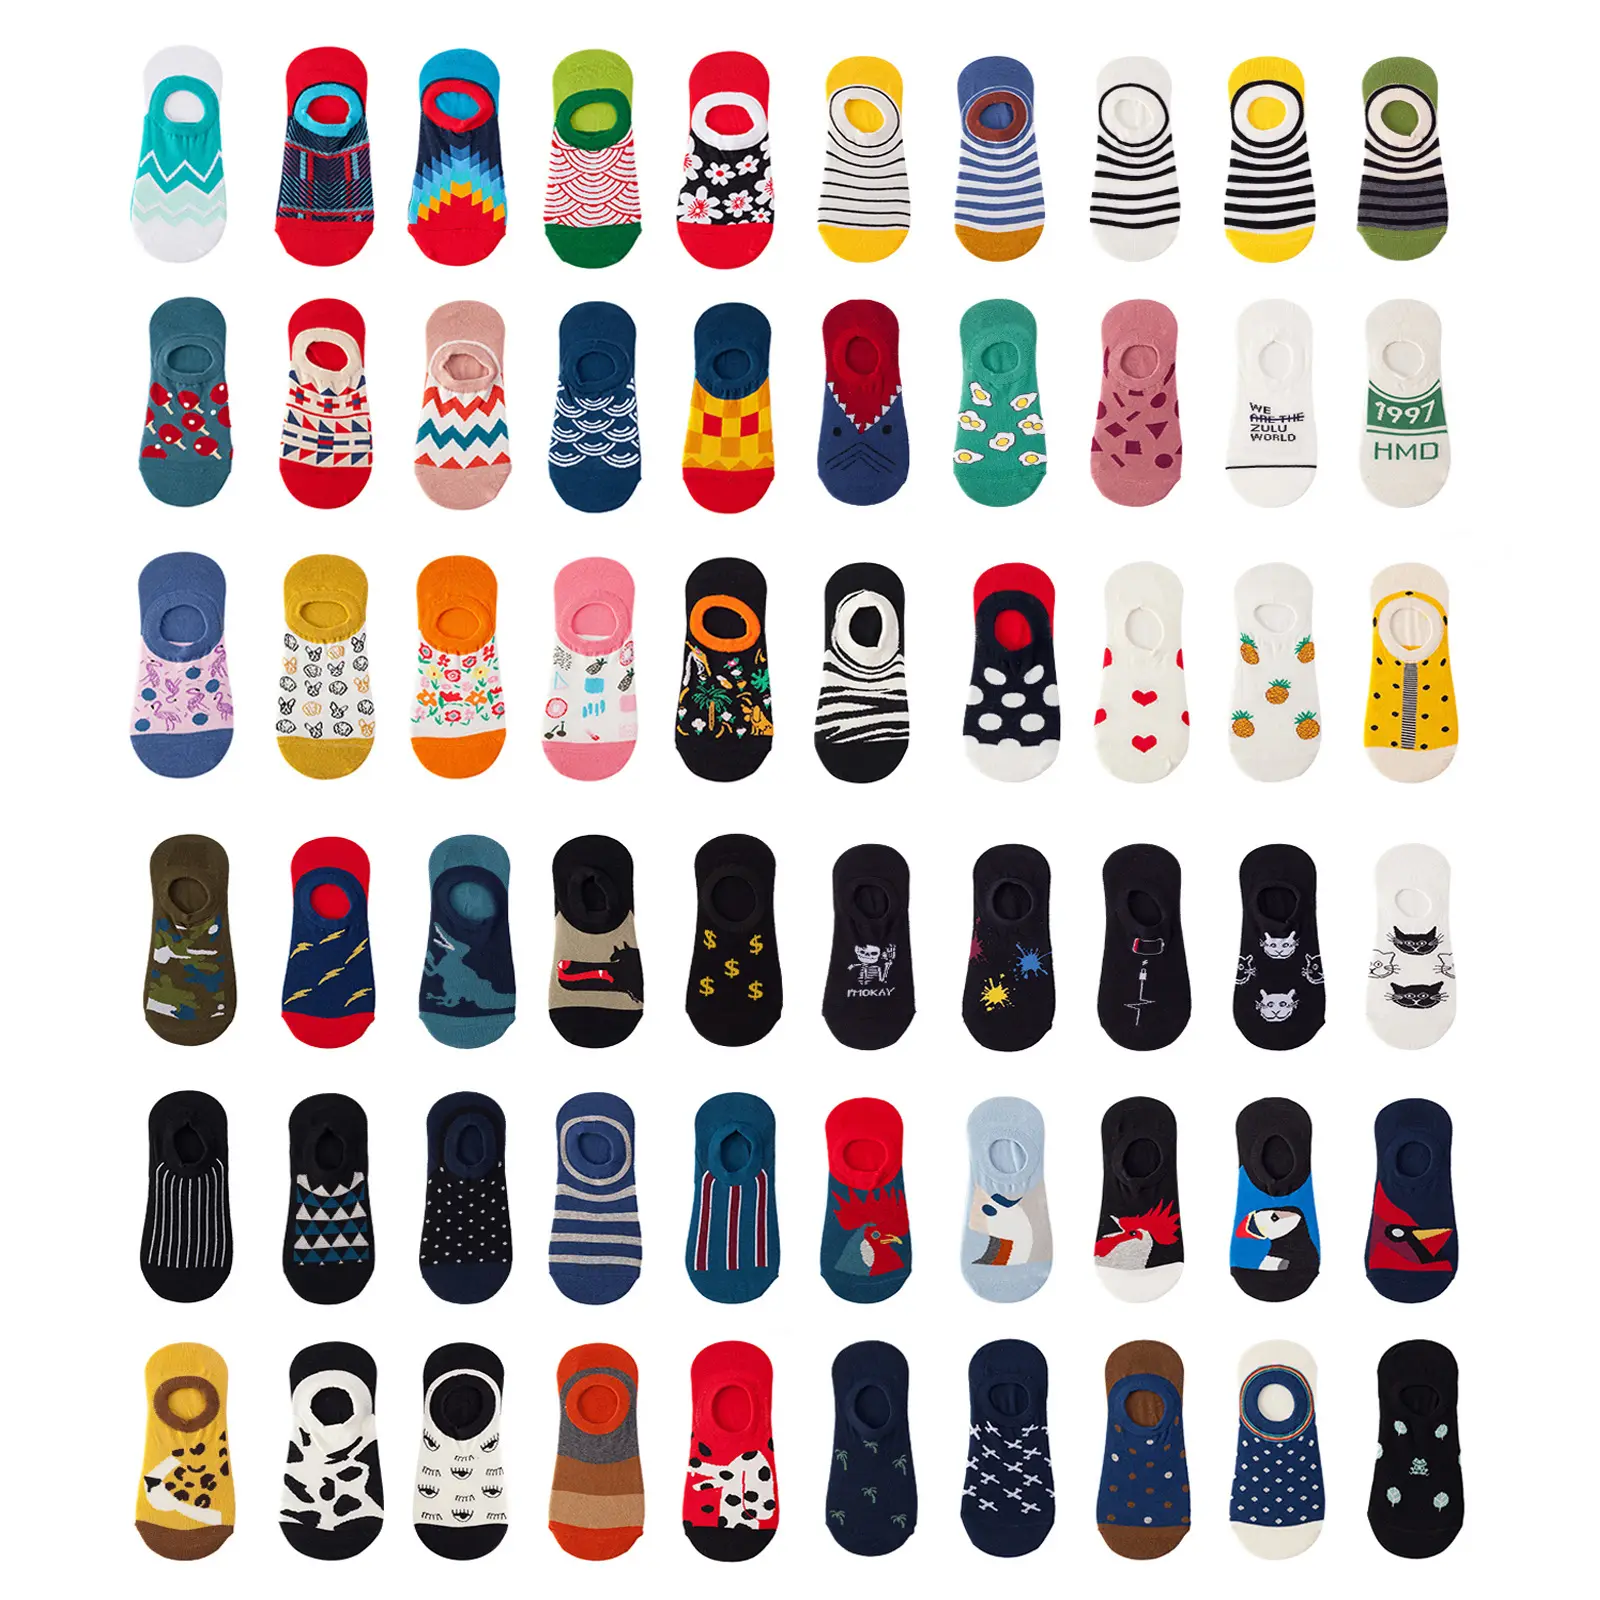 Whale Hot Sale High Quality Cute Comfortable Ankle Women Socks Cotton Fashion Summer Happy Funny Men Women Ankle Socks